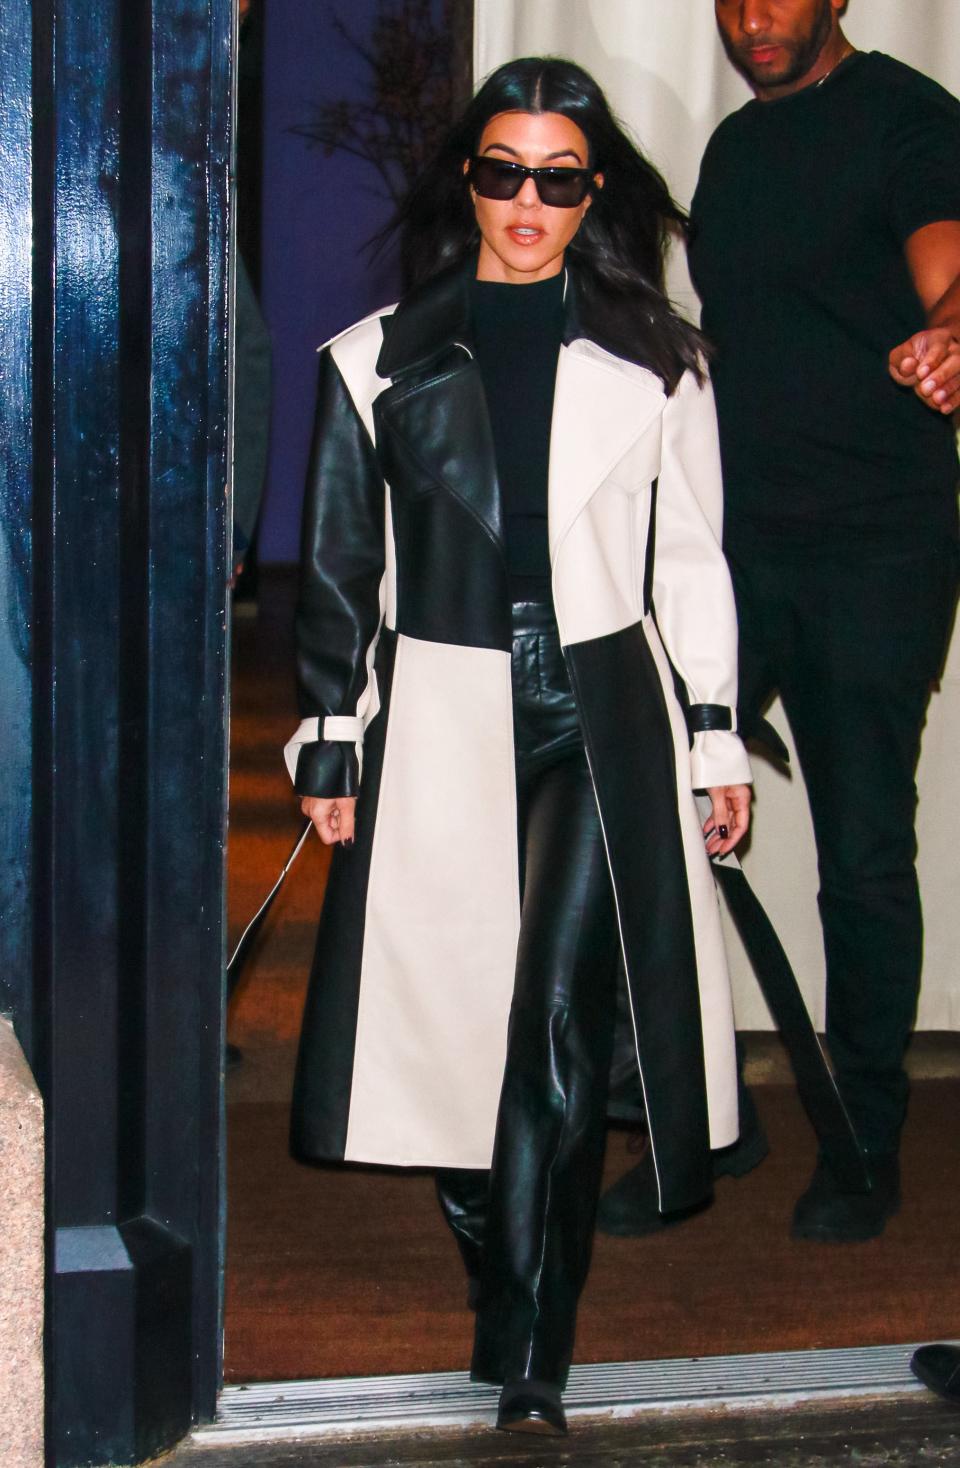 Kortney in a color-block black and white leather trench coat with a black shirt, leather pants, and dark sunglasses.